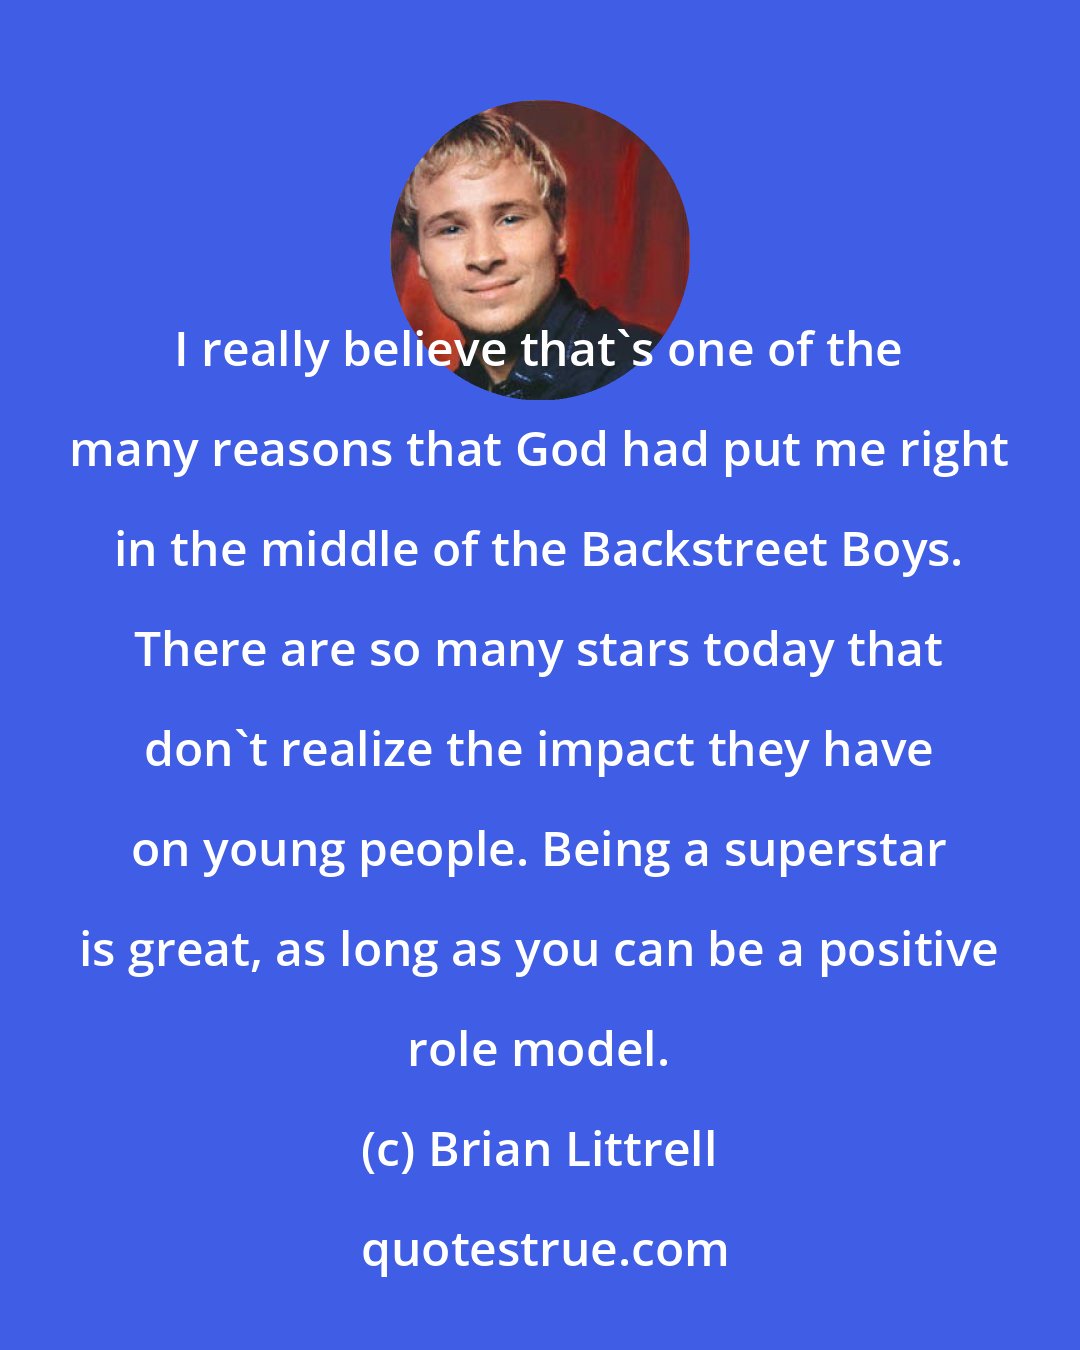 Brian Littrell: I really believe that's one of the many reasons that God had put me right in the middle of the Backstreet Boys. There are so many stars today that don't realize the impact they have on young people. Being a superstar is great, as long as you can be a positive role model.